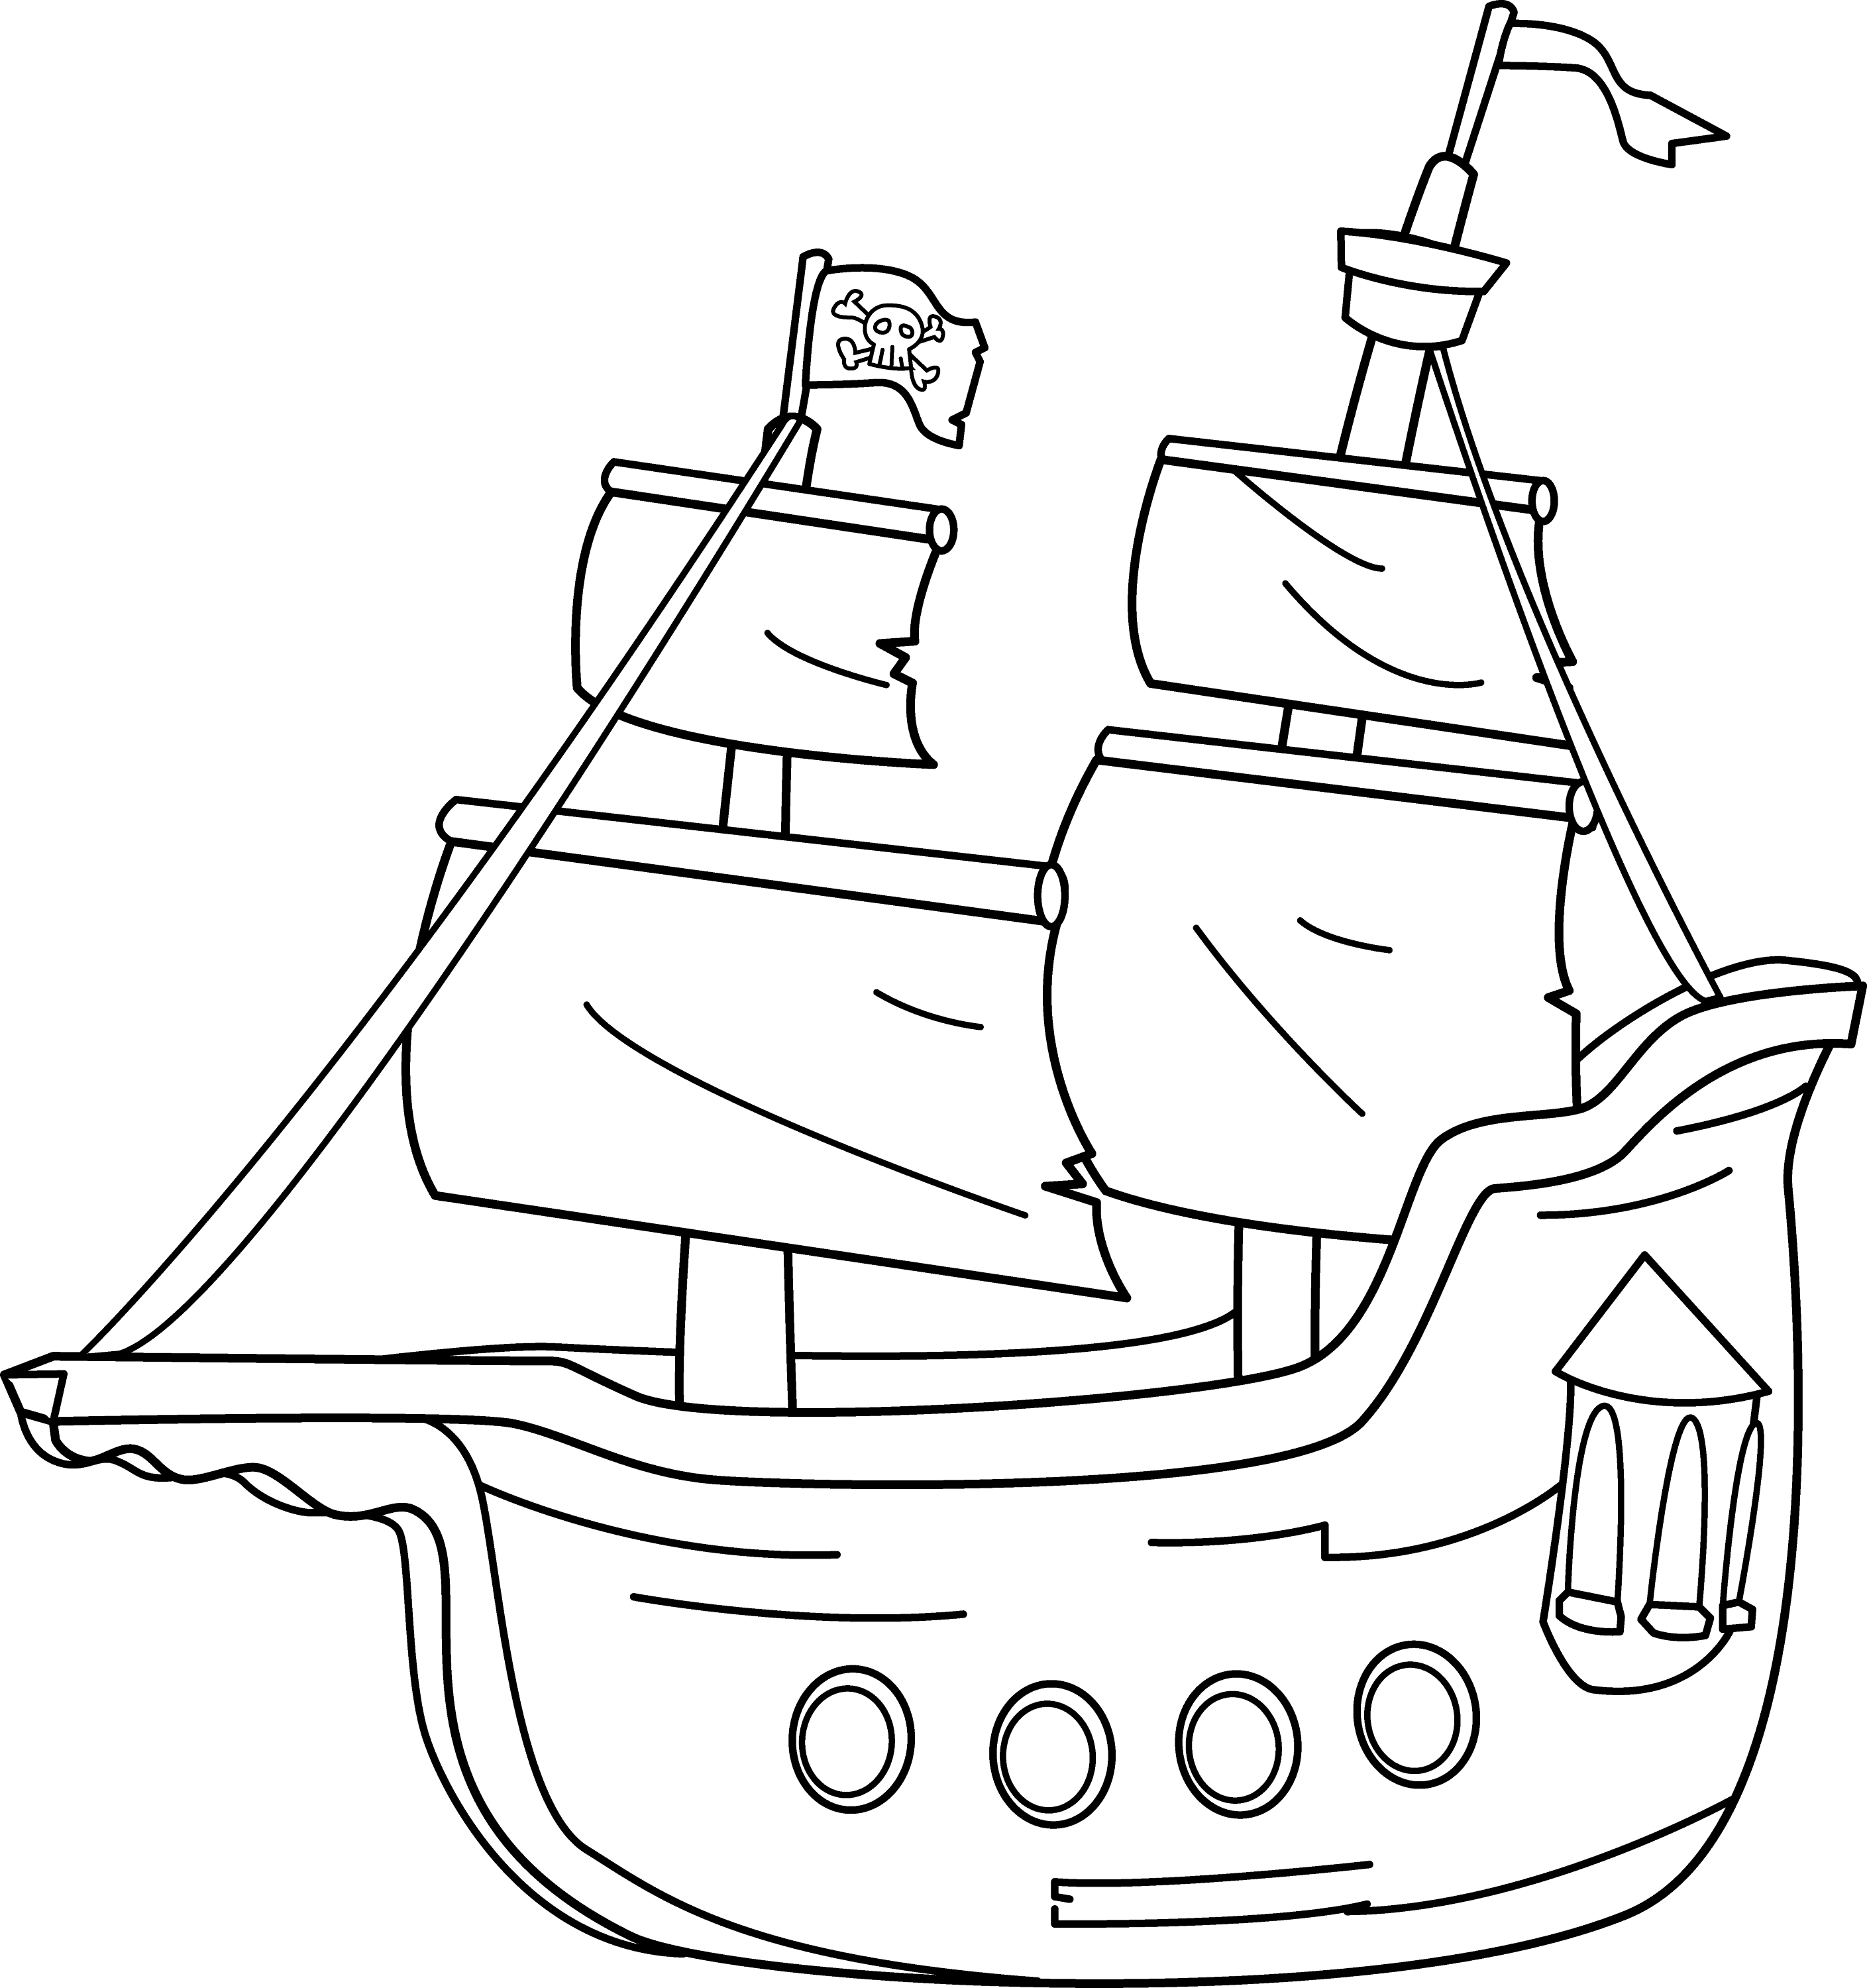 free black and white pirate clipart - photo #37